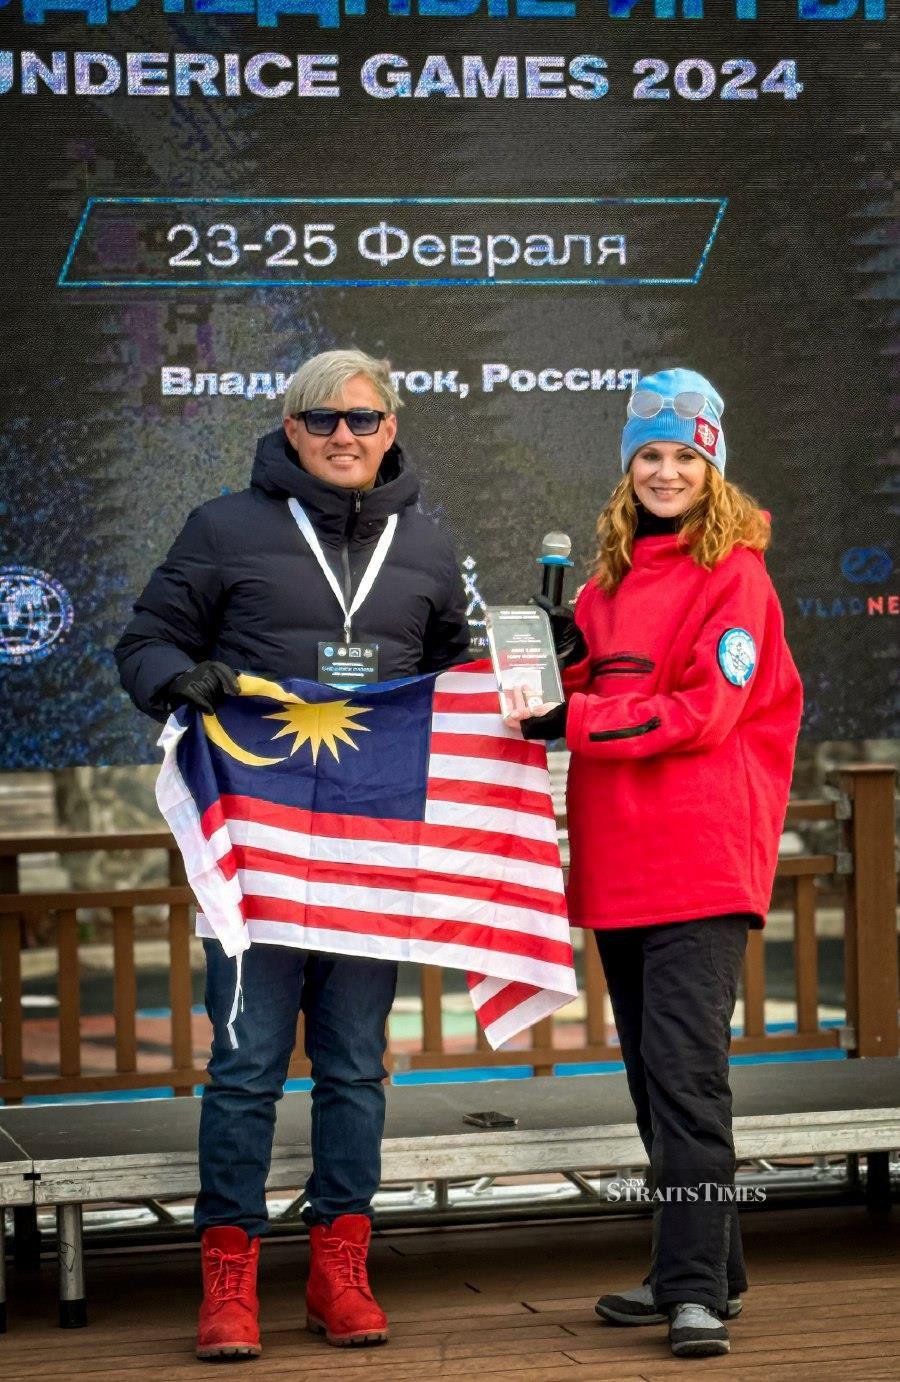  Semporna PADI course director Roihan Han, 32, secures fifth place in his first ice-diving competition in Russia. - Pic courtesy of Roihan Han.